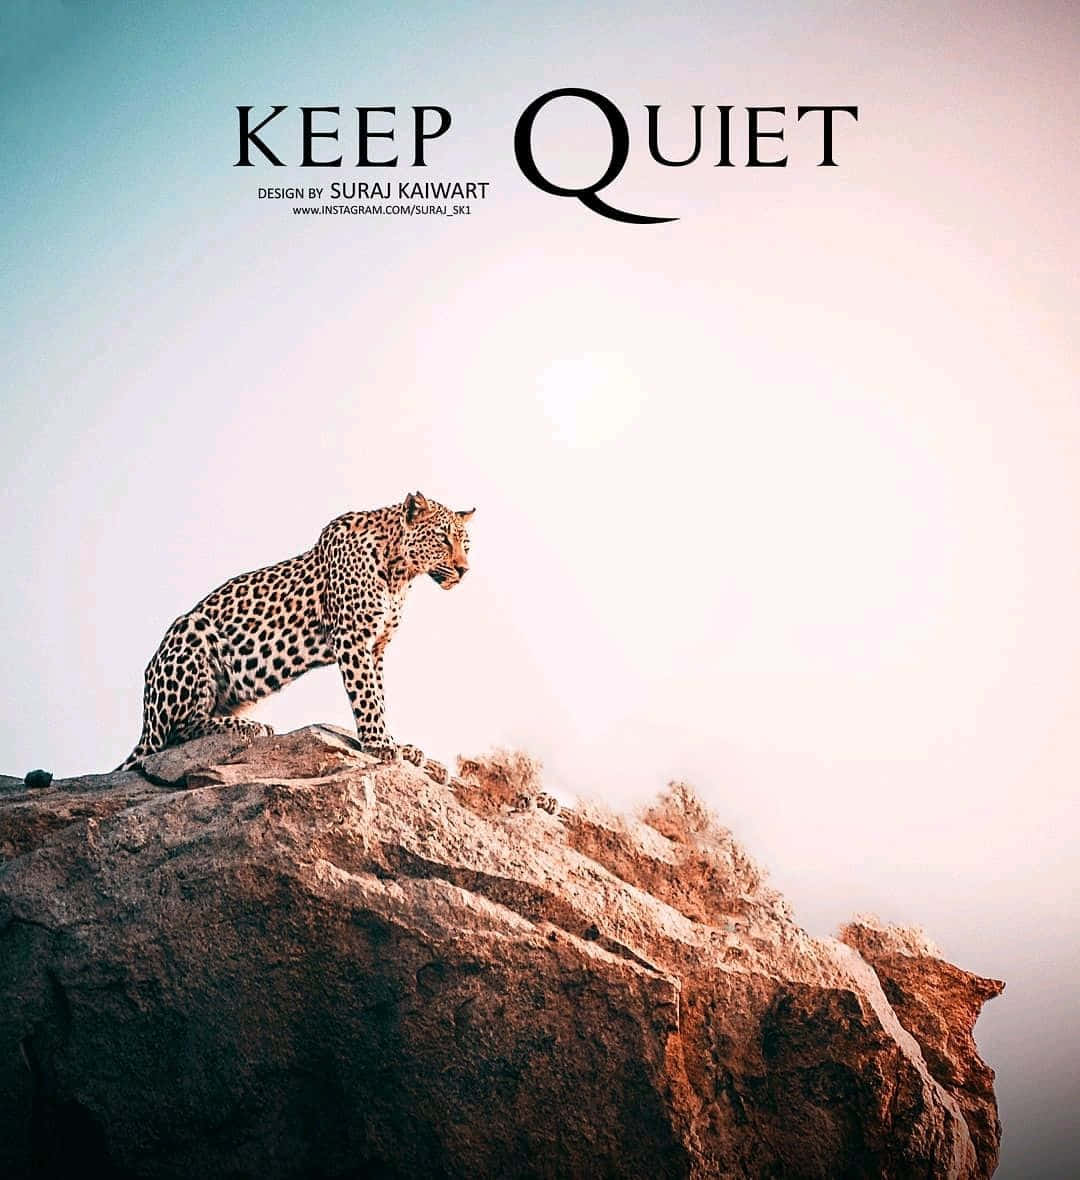 Keep Quiet - A Leopard On Top Of A Rock